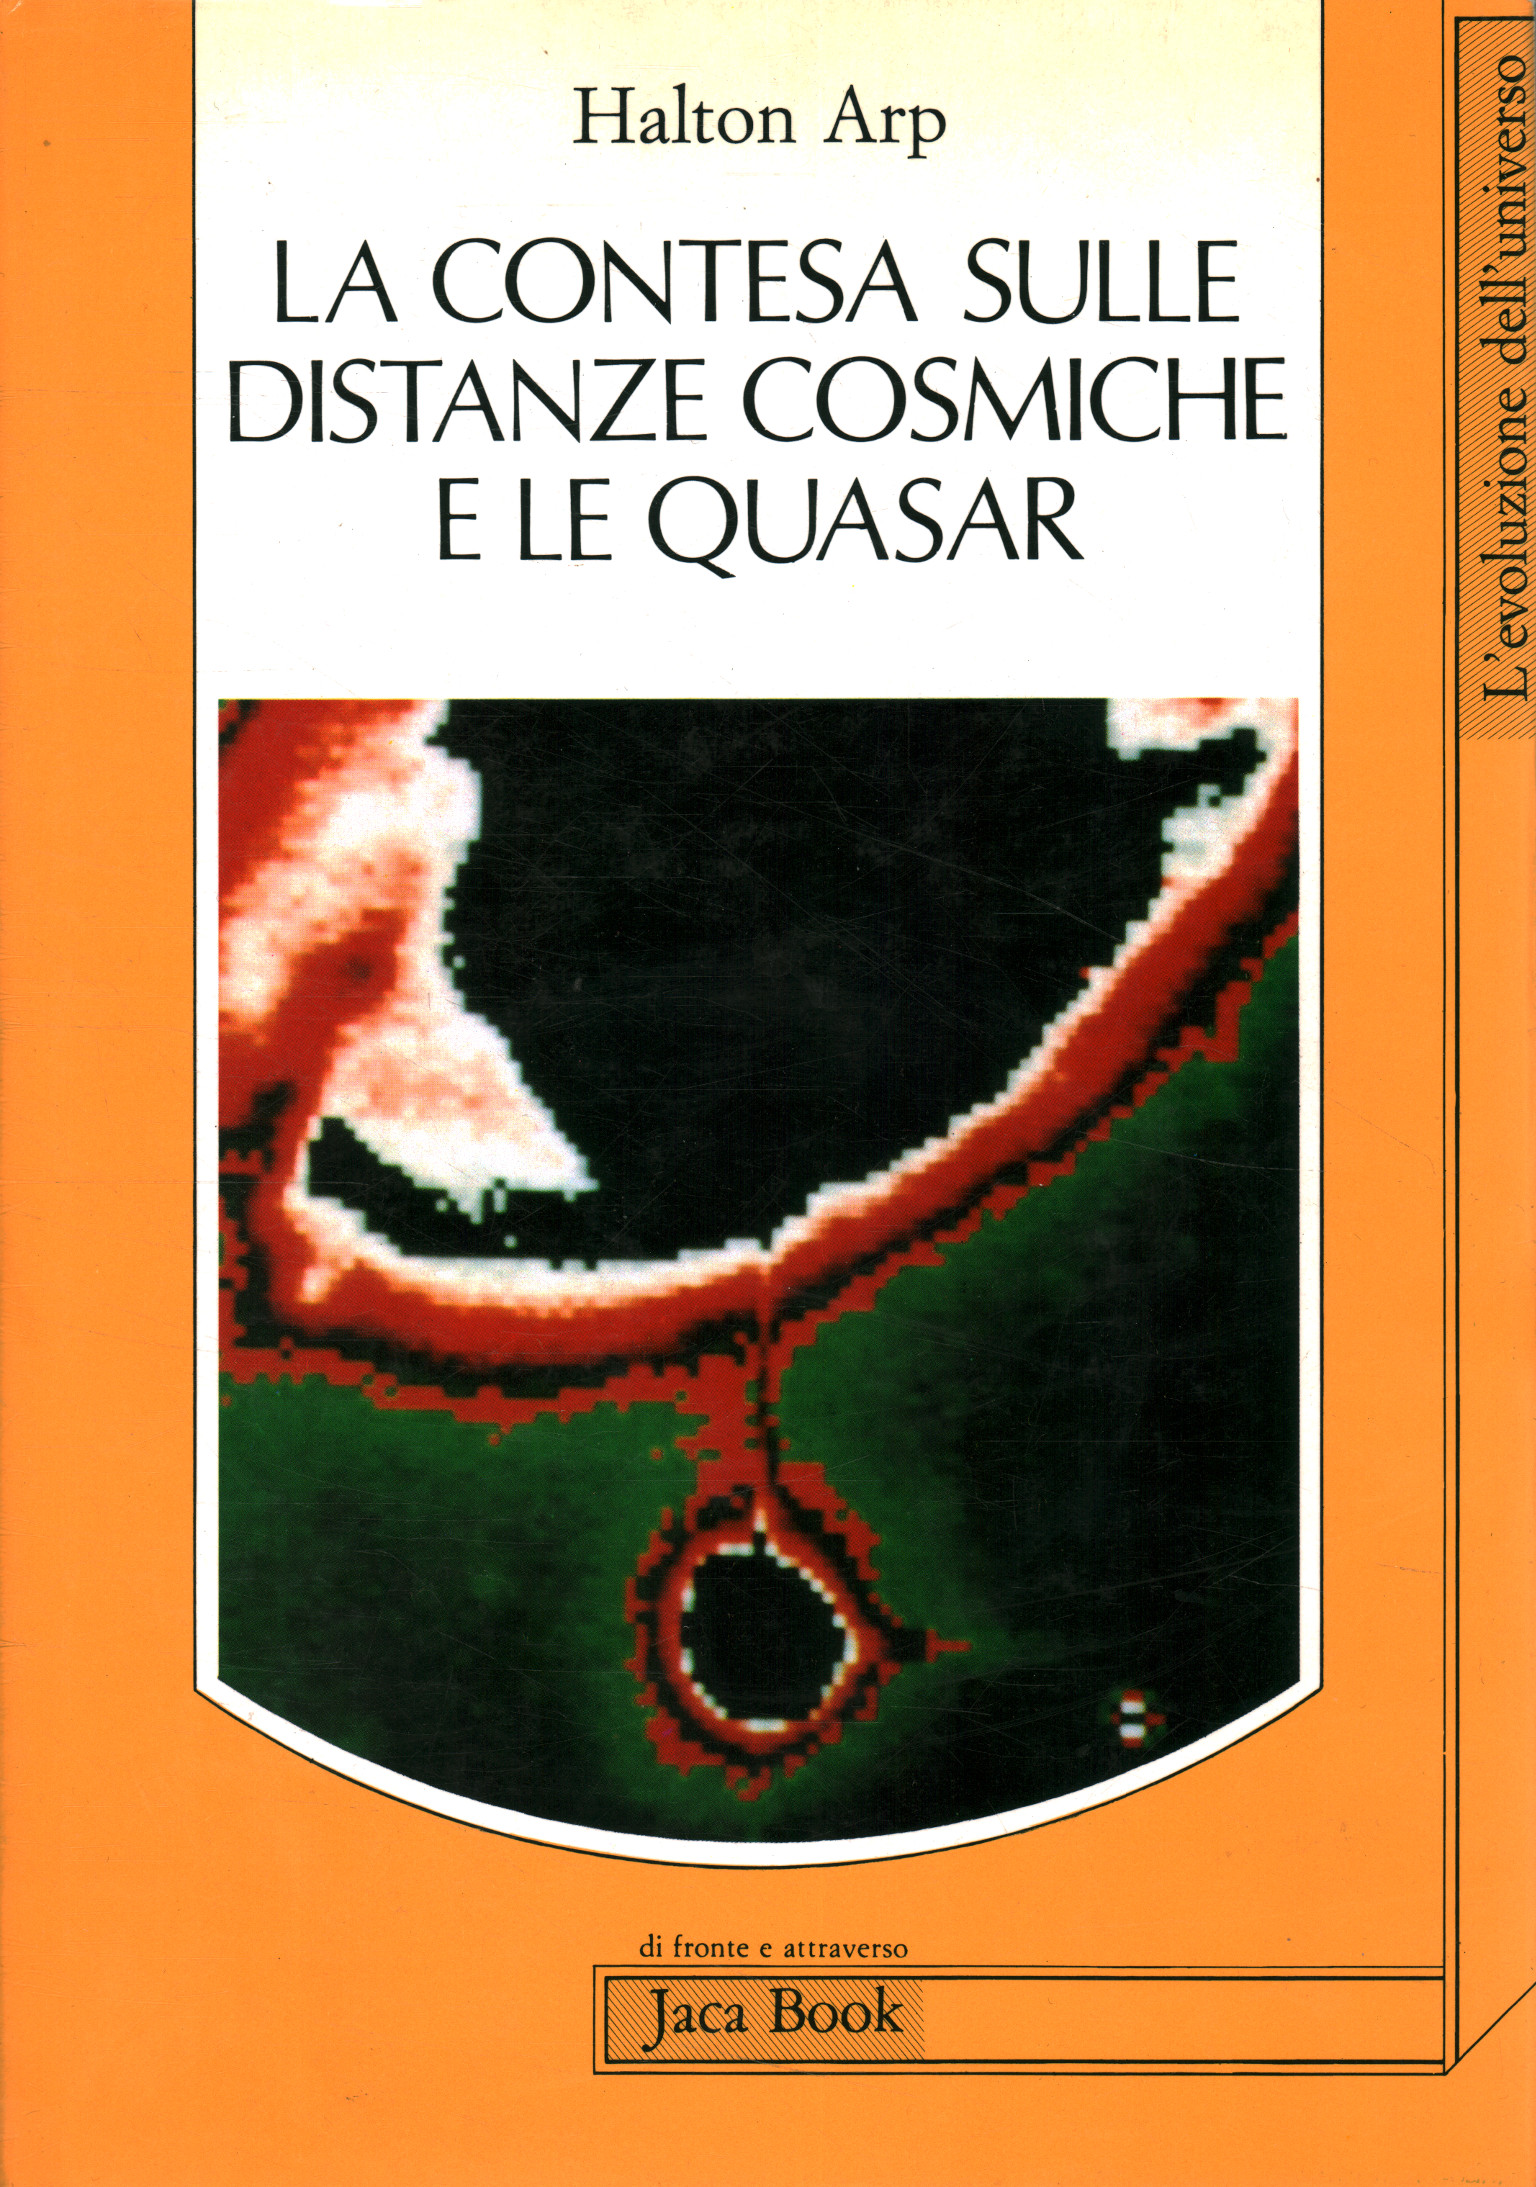 The dispute over cosmic distances and the